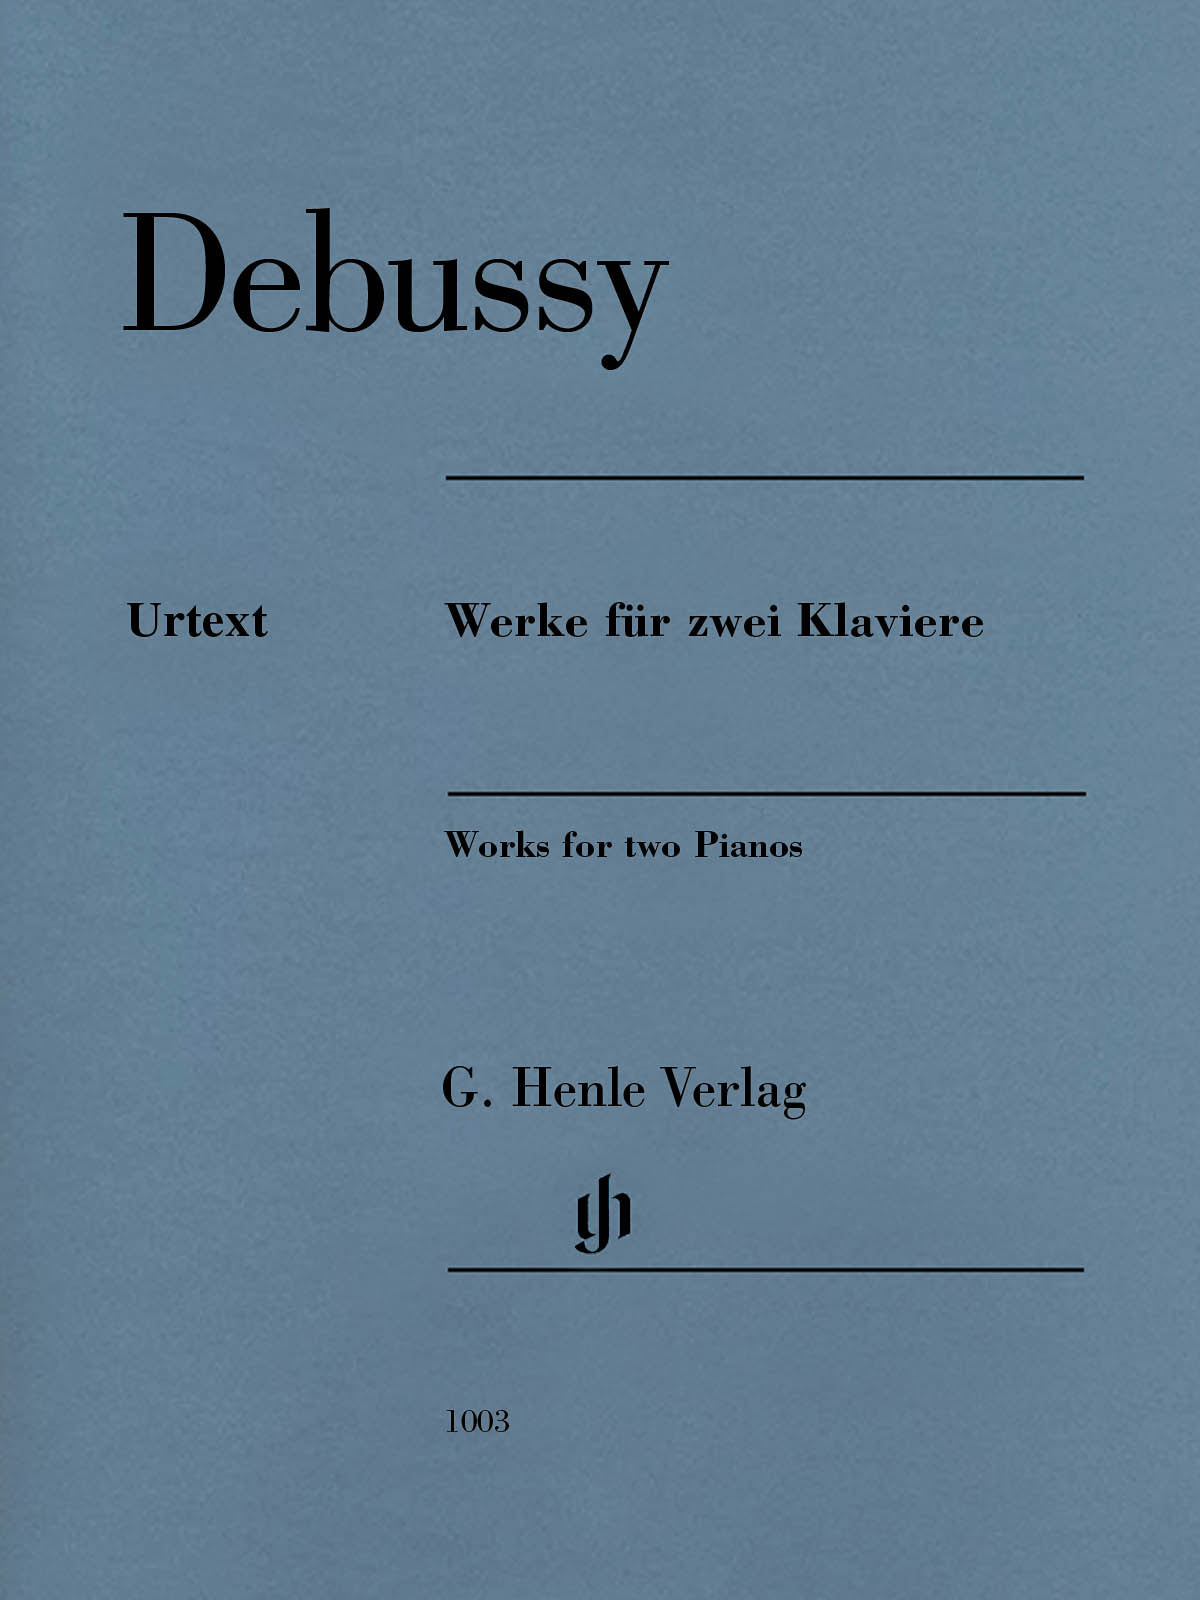 Debussy: Works for Two Pianos